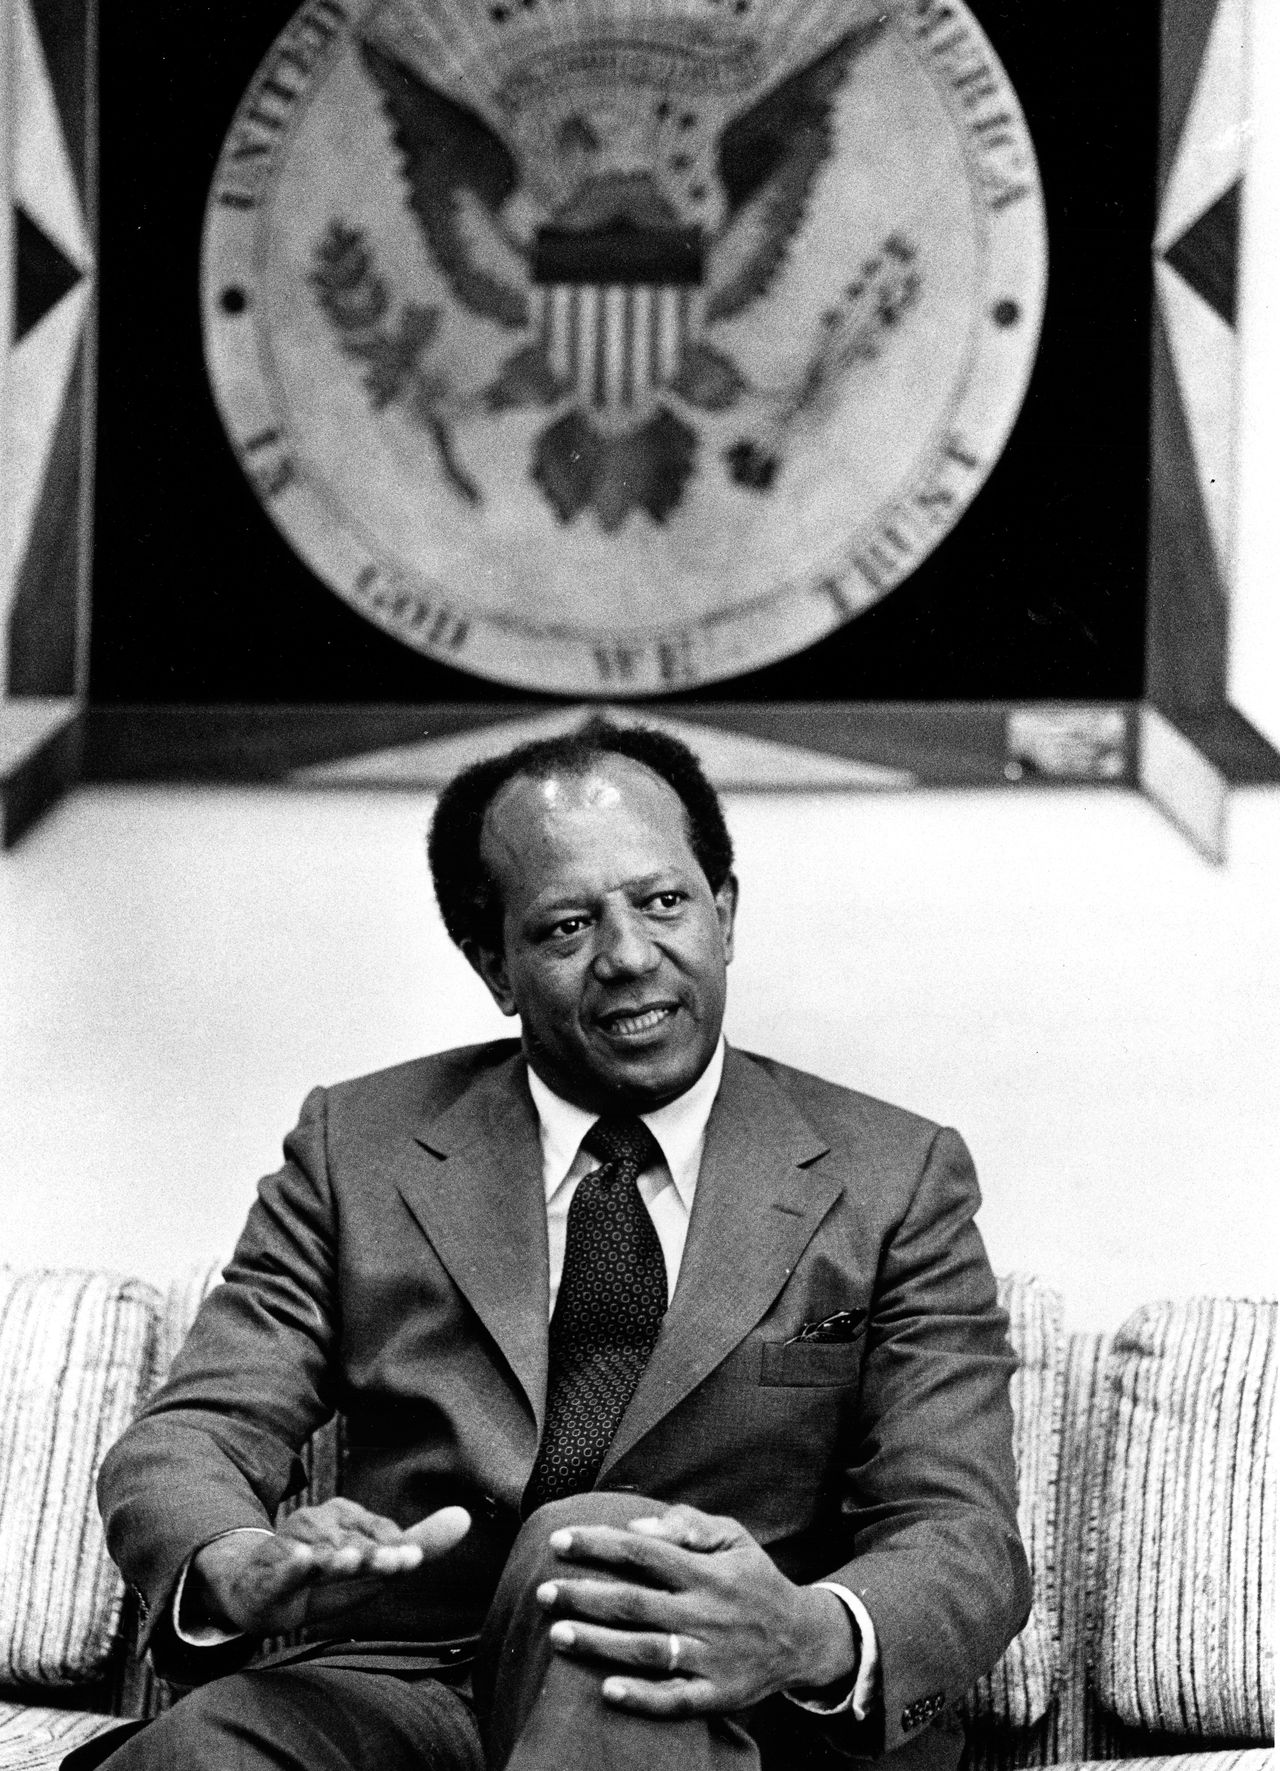 Terence Todman ultimately became the first Black person to head one of the State Department's geographic divisions.